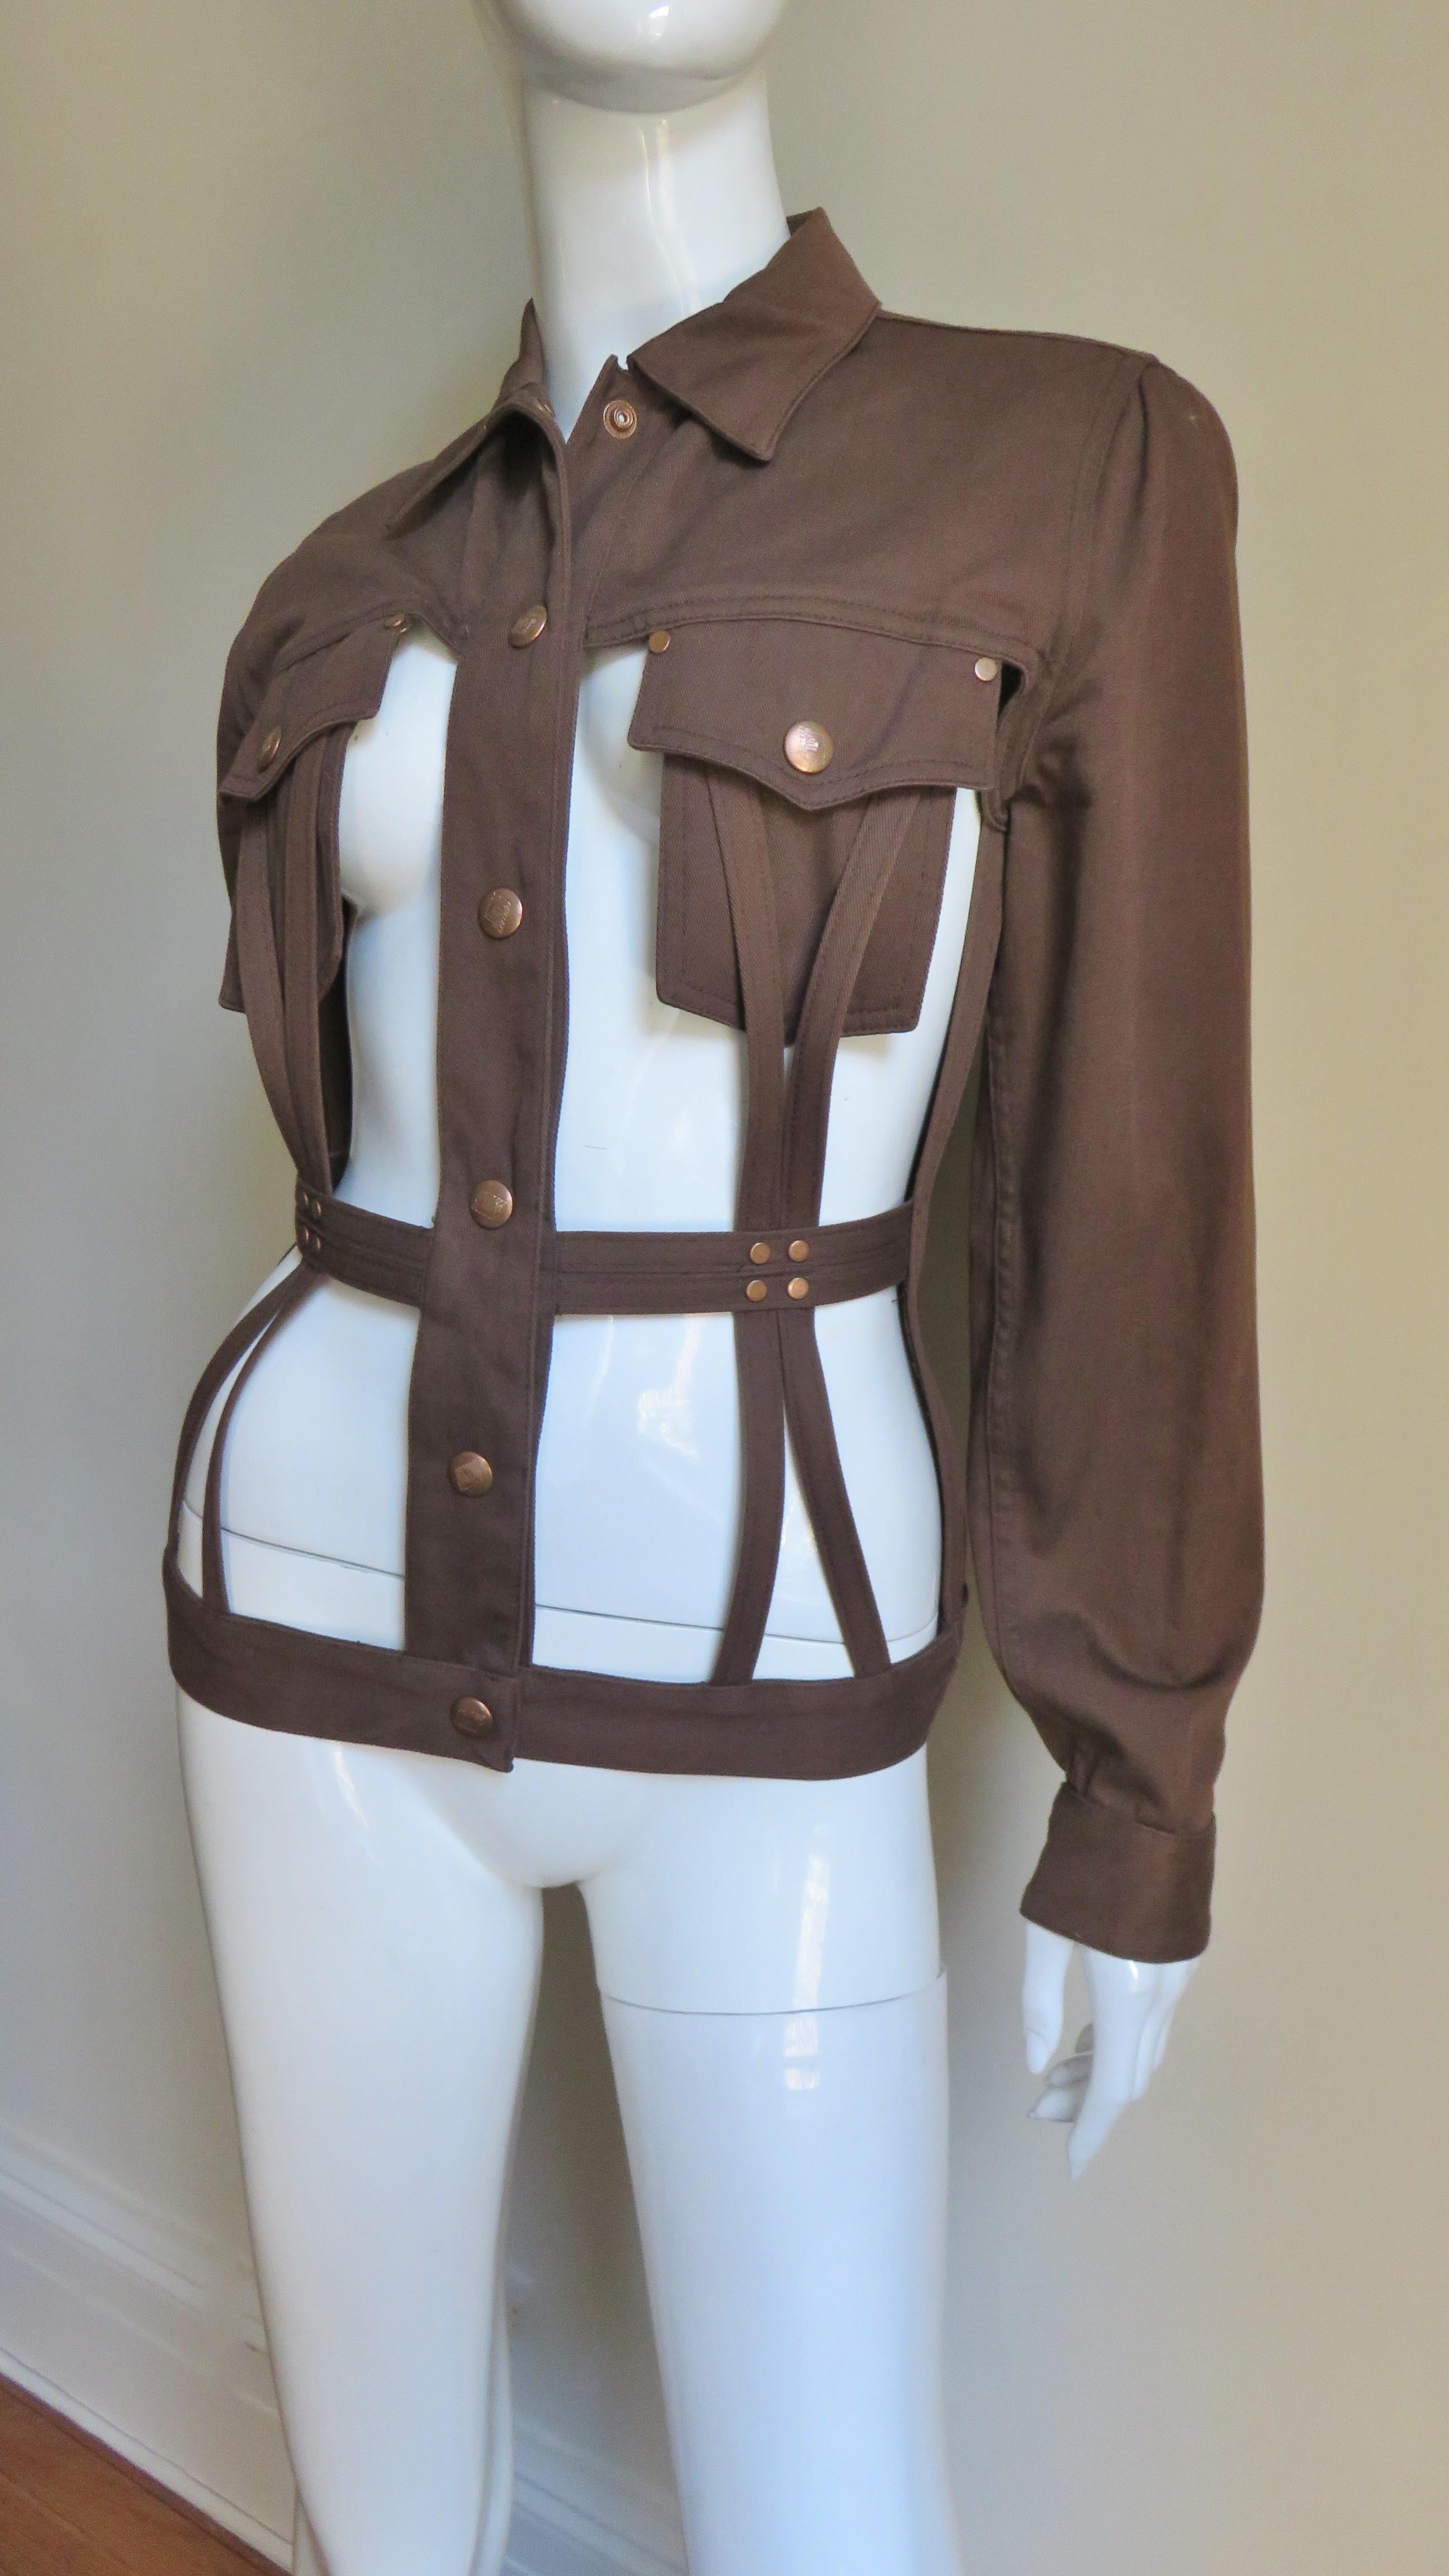  Jean Paul Gaultier 1980s Cage Jacket For Sale 2